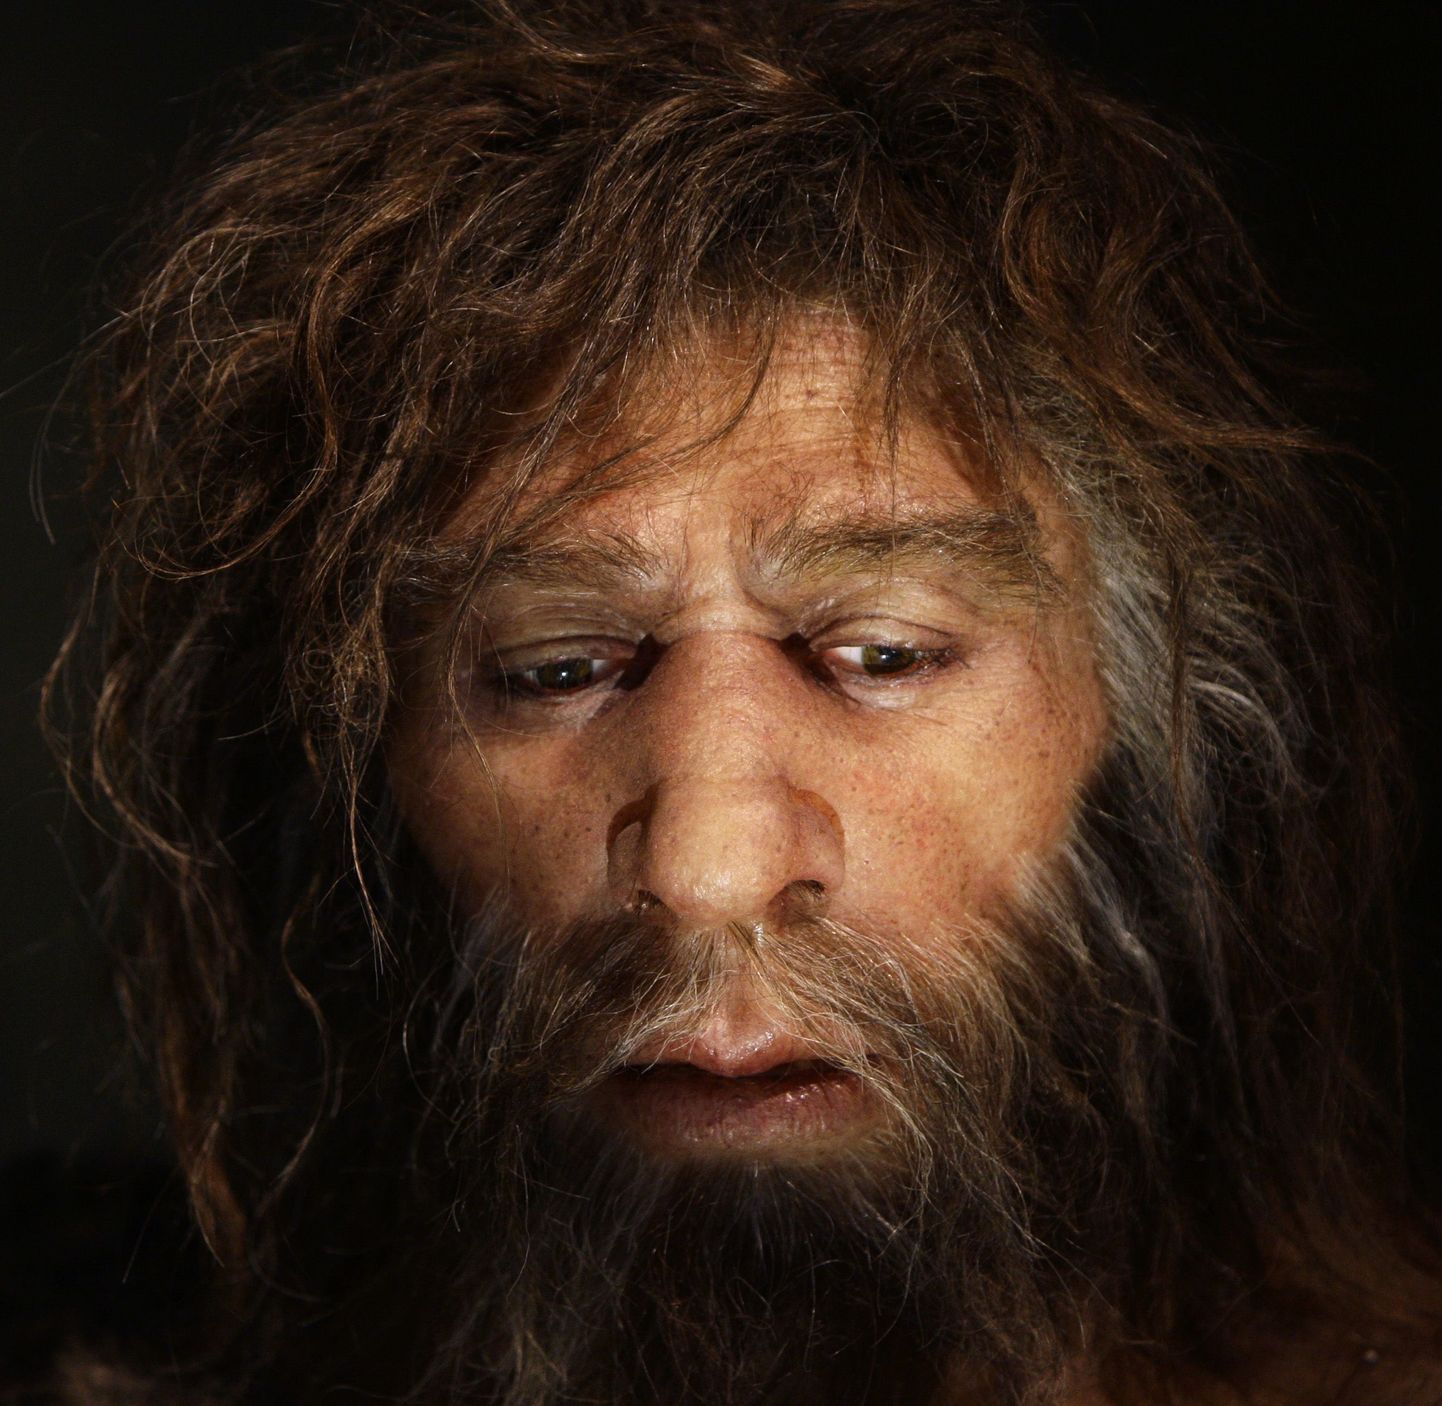 Hyperrealistic face of a neanderthal male is displayed in a cave in the new Neanderthal Museum in the northern Croatian town of Krapina in this February 25, 2010, file photo. Scientists said on March 18, 2016, an analysis of genetic information on about 1,500 people from locations around the world confirmed at least four interbreeding episodes tens of thousands of years ago, three with our close cousins the Neanderthals and one with the mysterious extinct human species known as Denisovans. REUTERS/Nikola Solic/Files